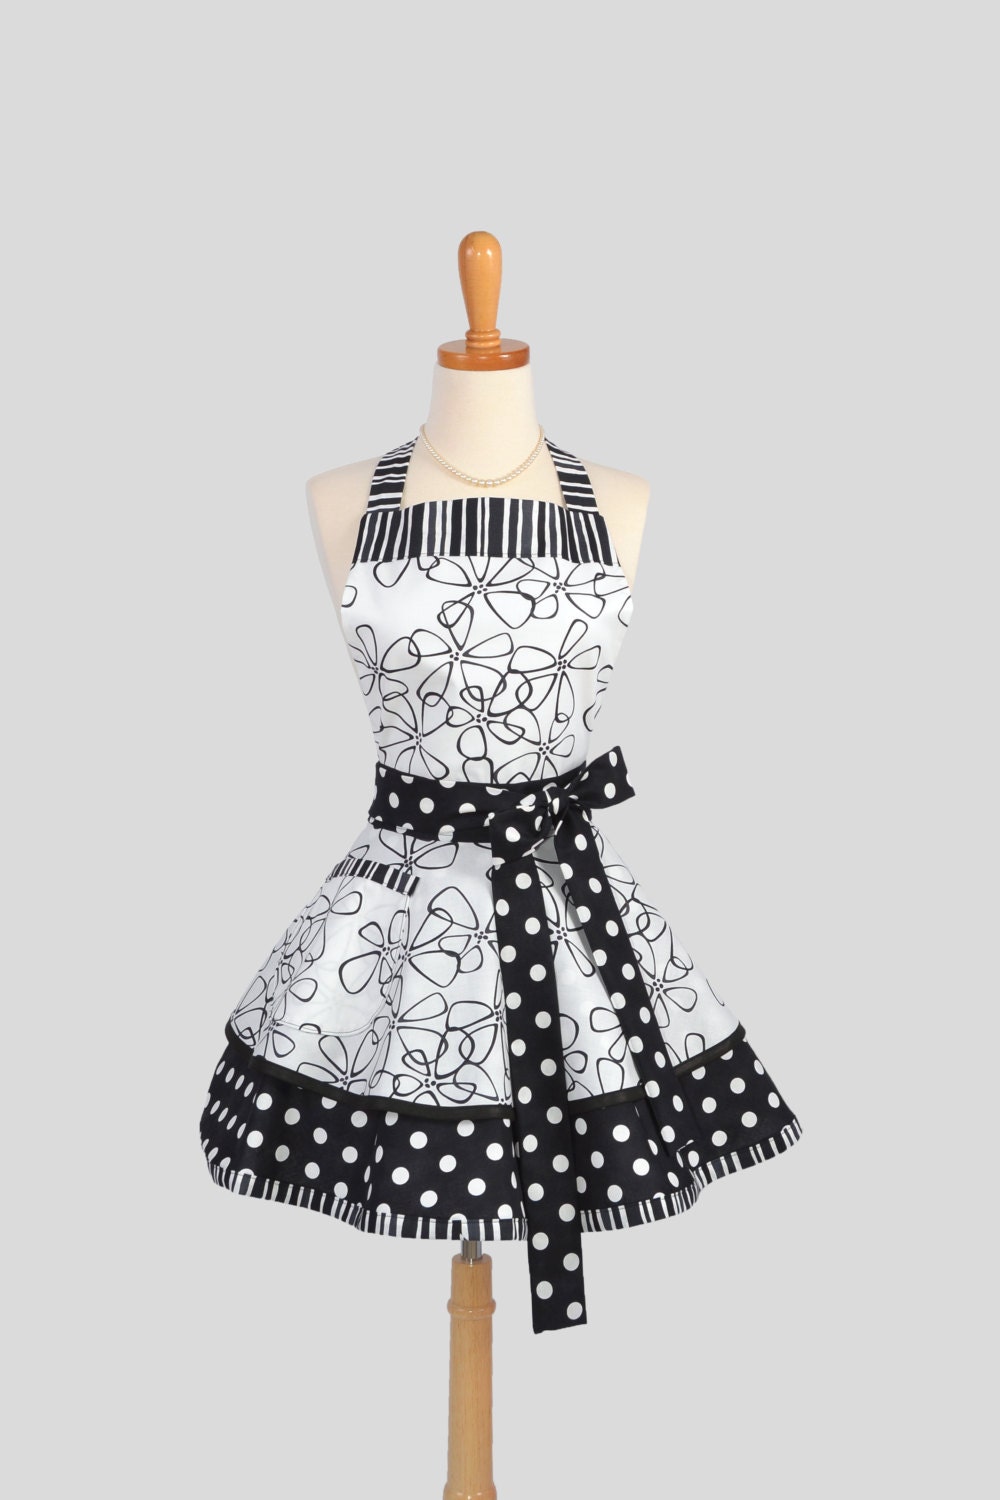 Ruffled Retro Apron .  Sexy Womens Apron in Black and White Dots and Stripes Handmade Full Kitchen Apron